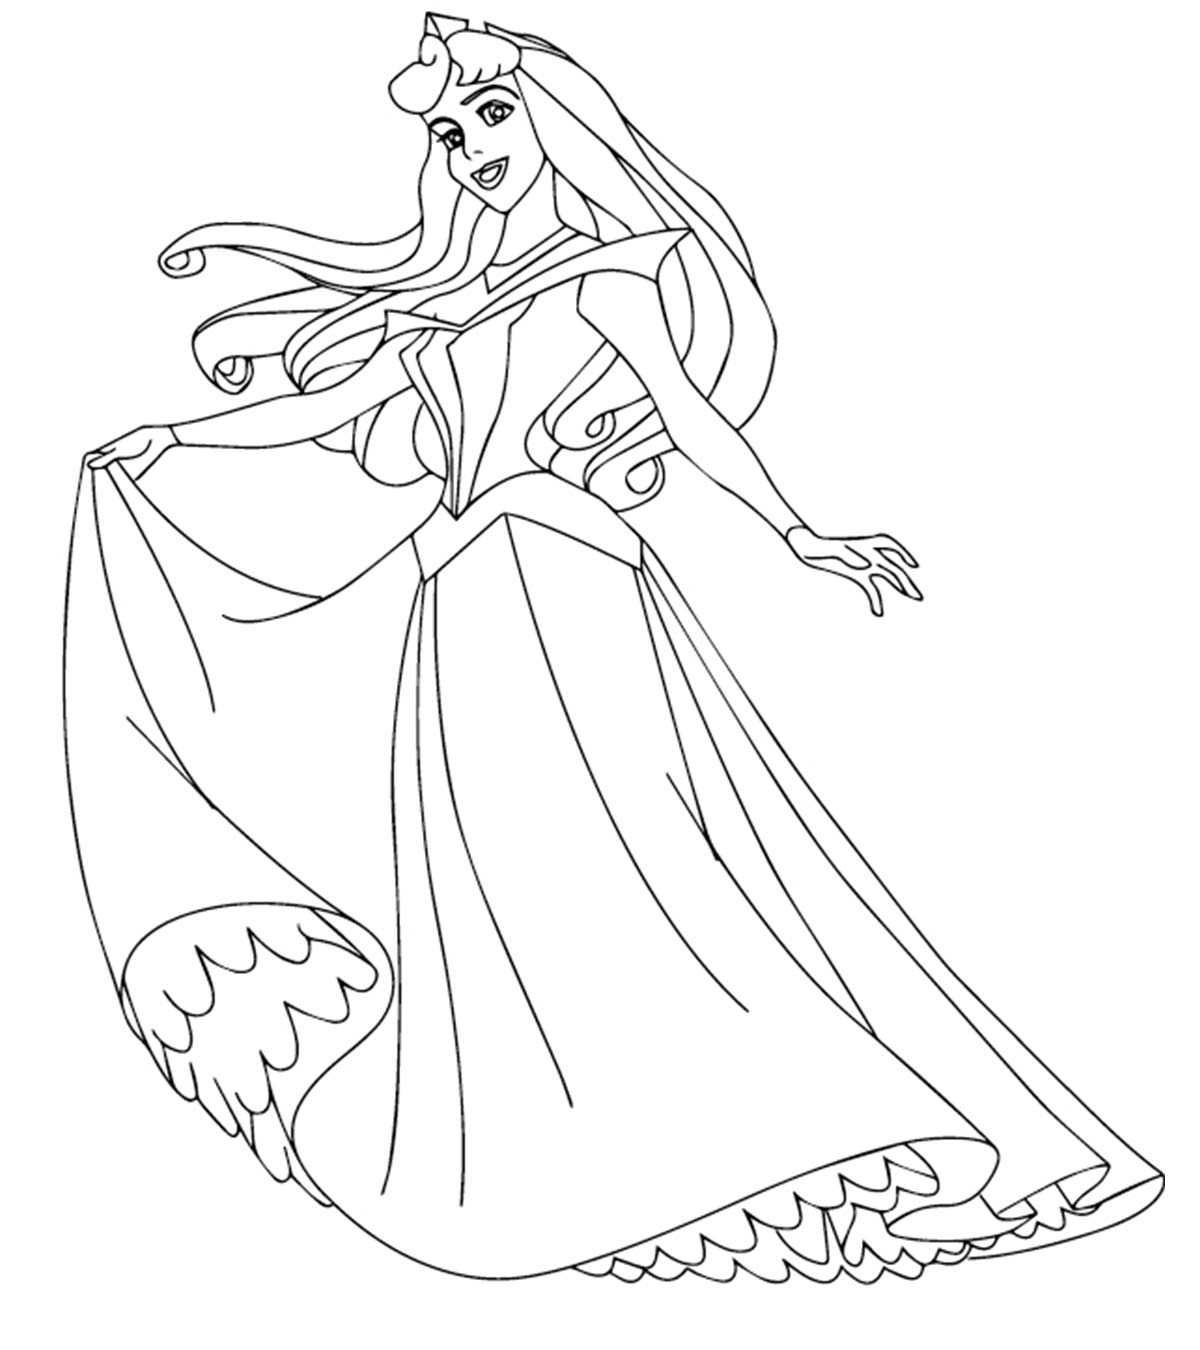 colouring pages for disney princesses disney princess tiana coloring pages to girls pages for colouring disney princesses 